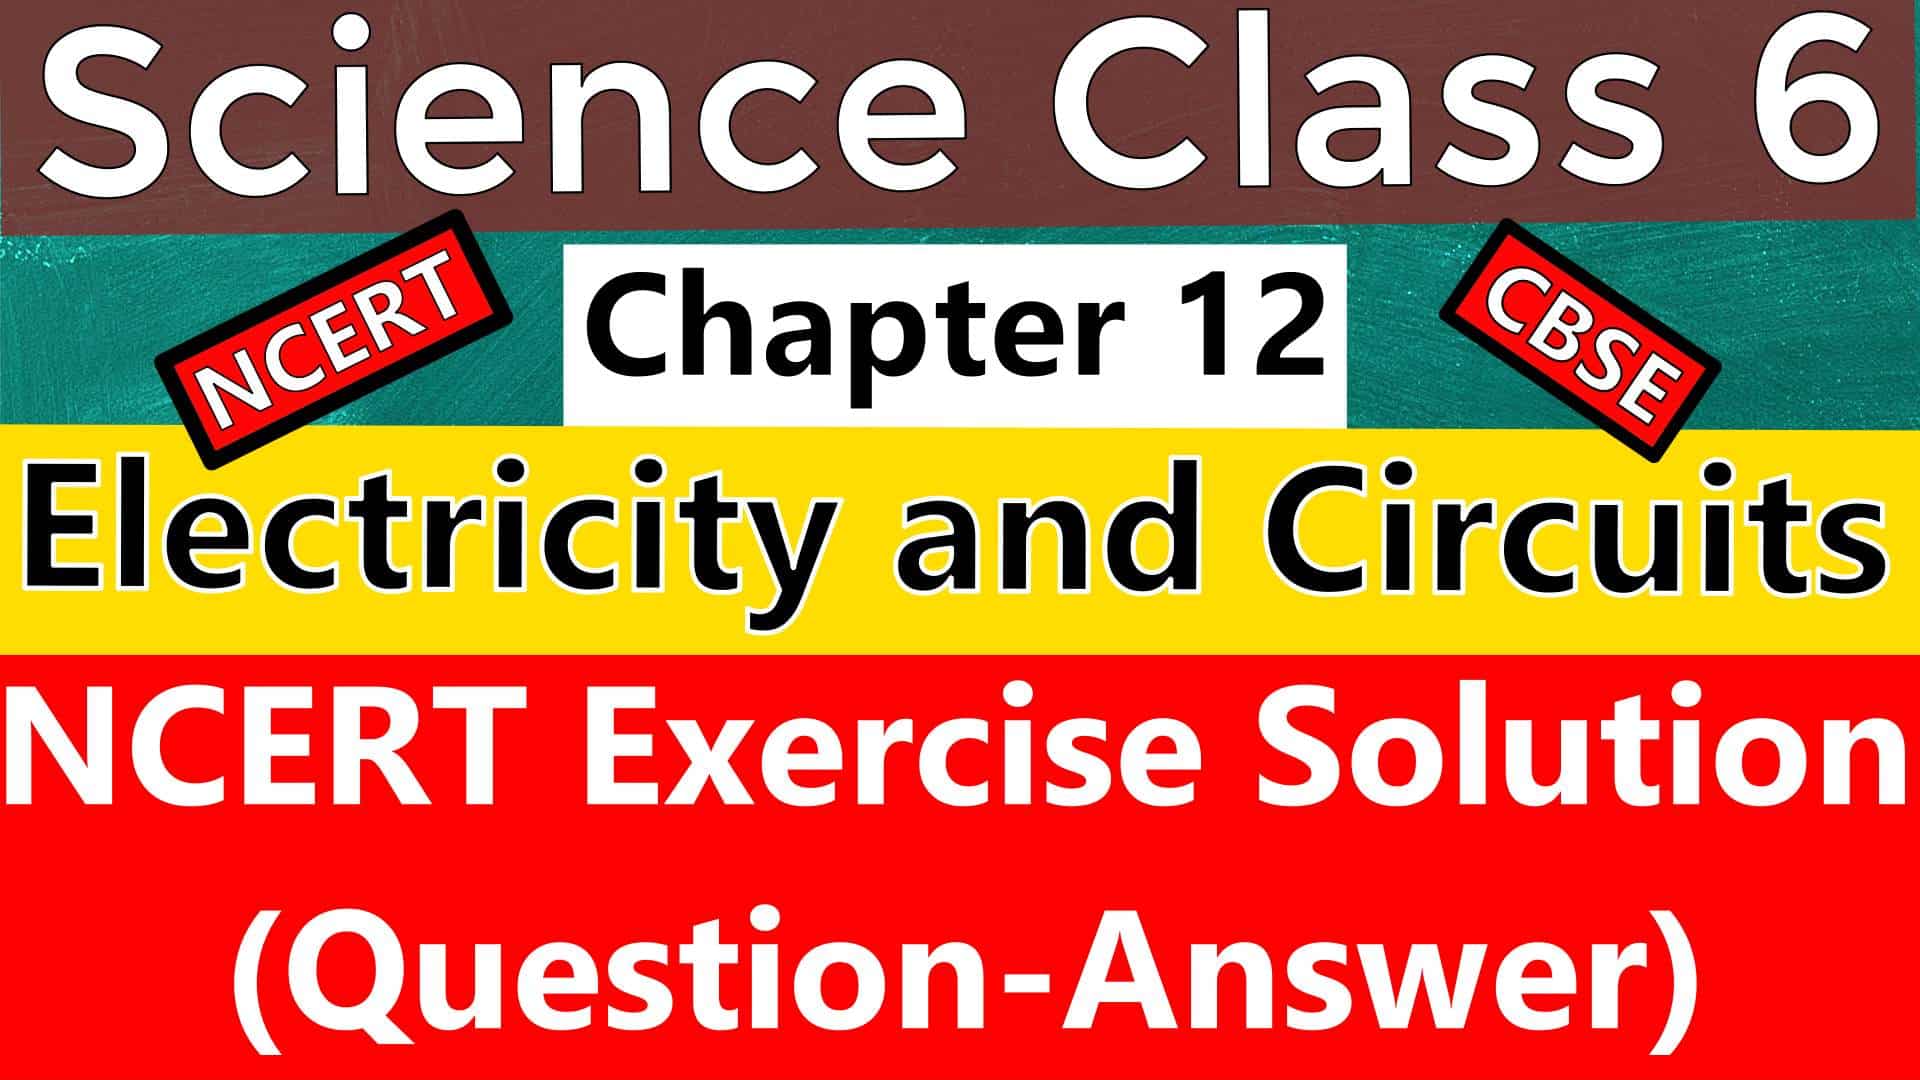 CBSE Science Class 6 - Chapter 12 -Electricity and Circuits - NCERT Exercise Solution (Question-Answer)